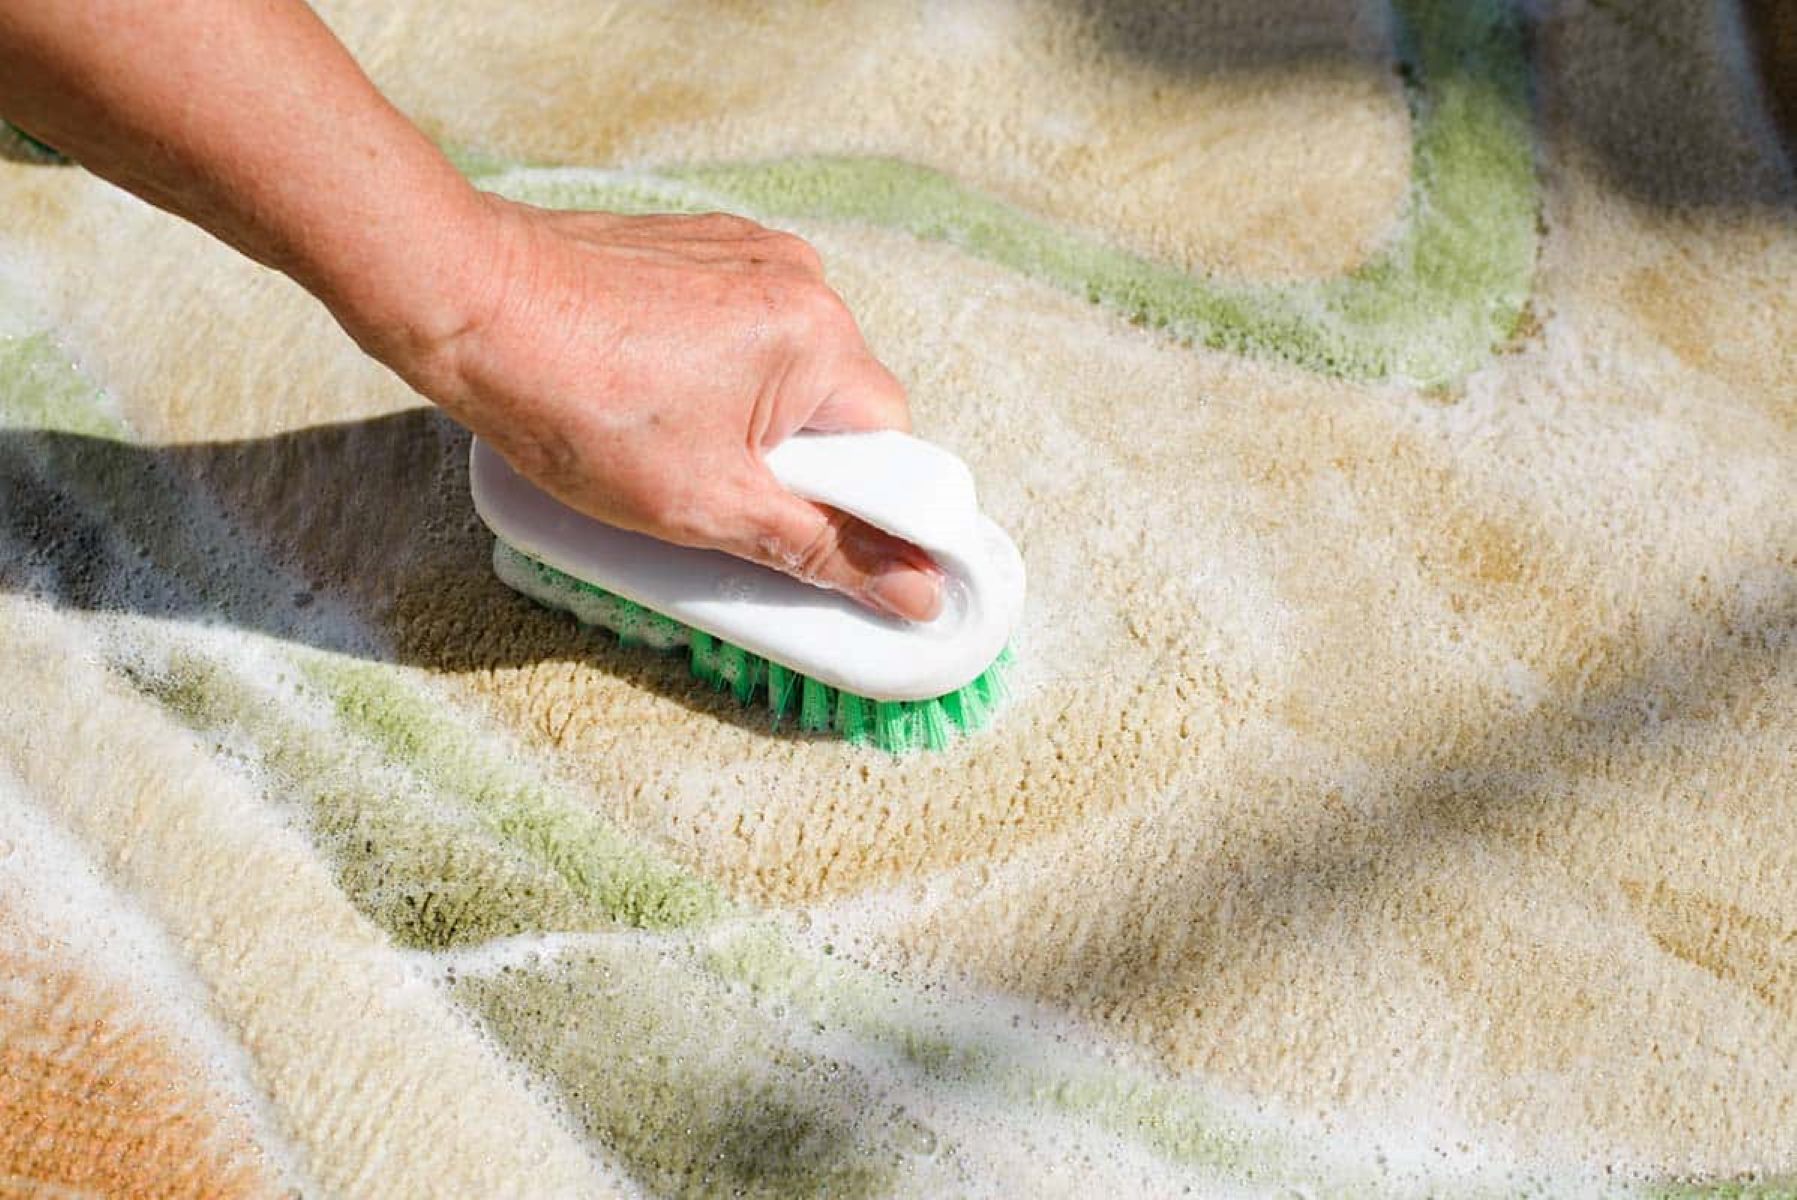 How To Clean Rugs Without A Carpet Cleaner